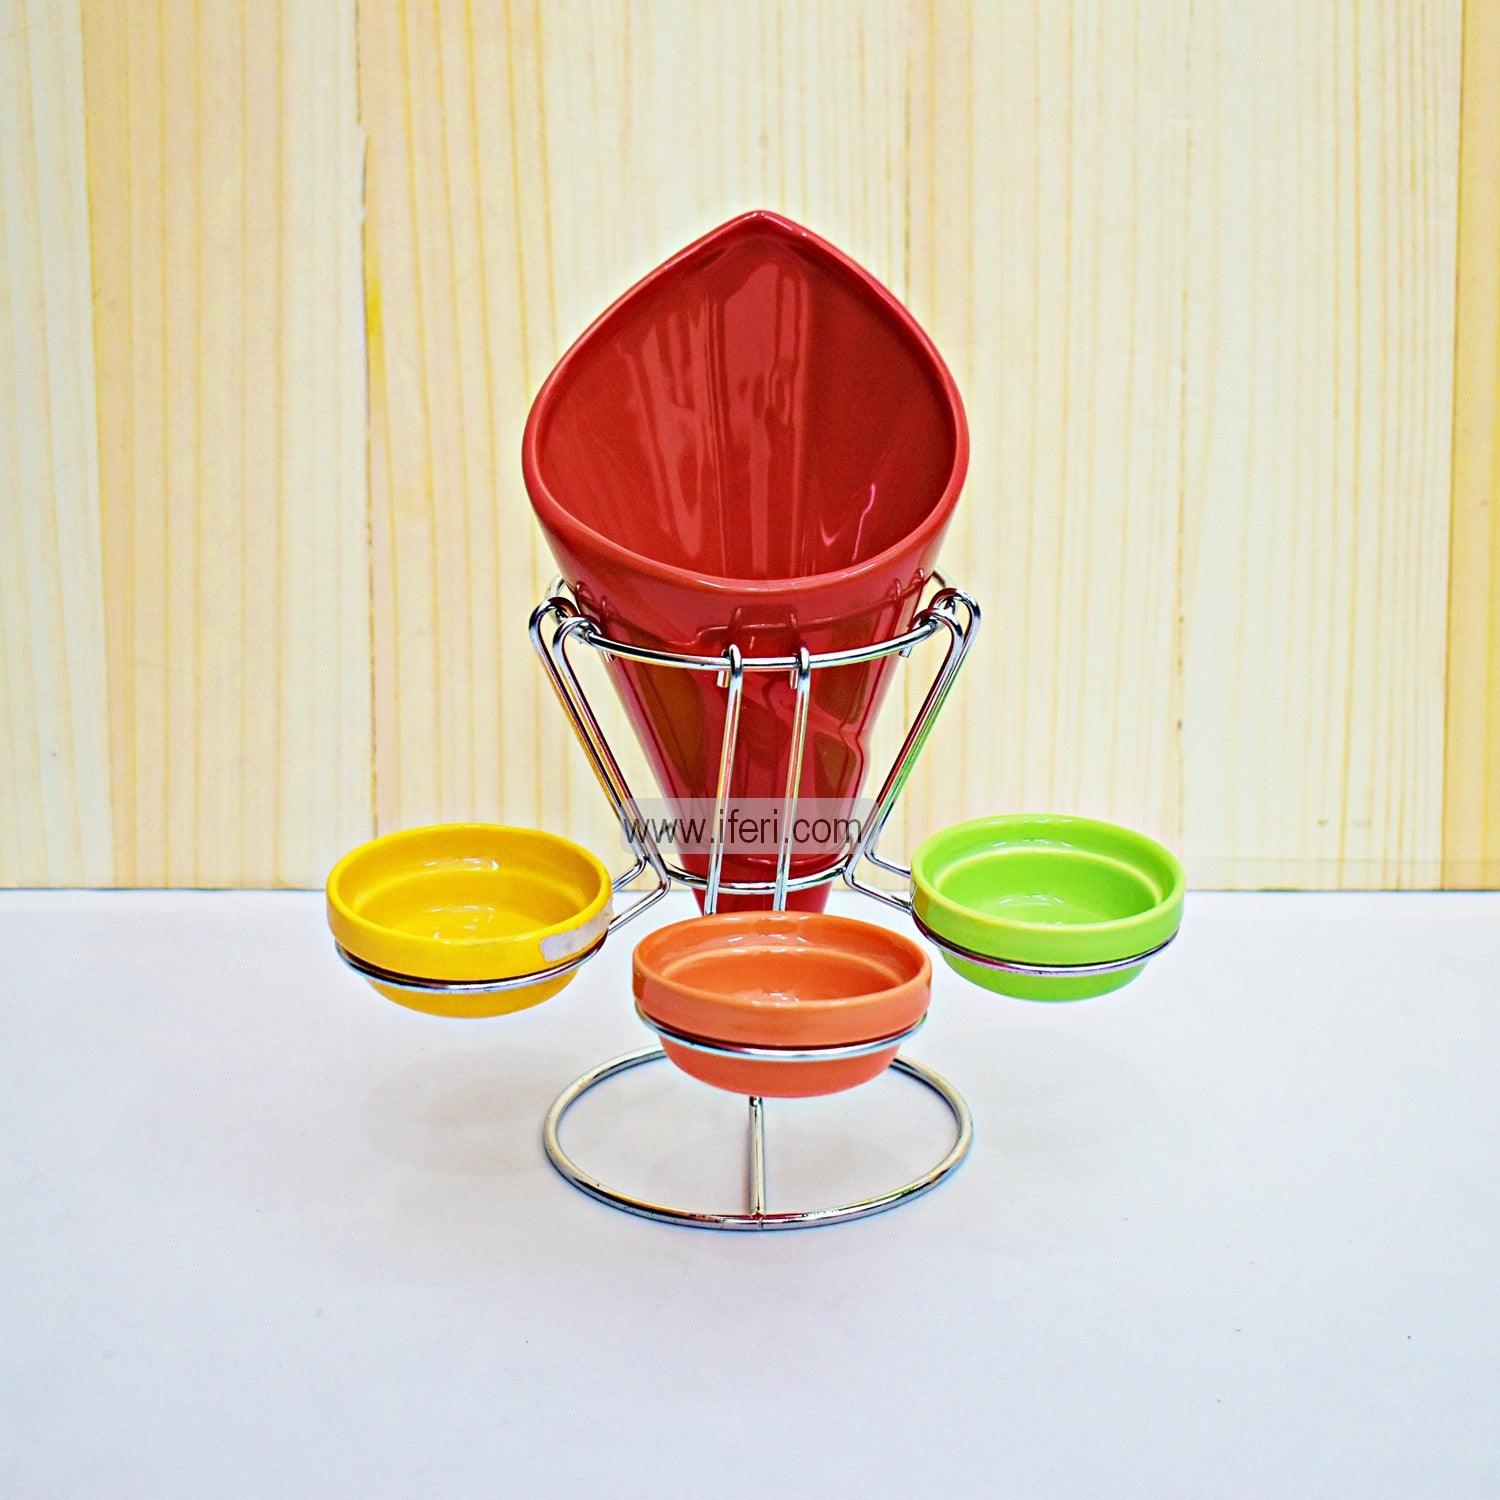 Ceramic French Fry Cone with Dipping Bowl RH2766 Price in Bangladesh - iferi.com